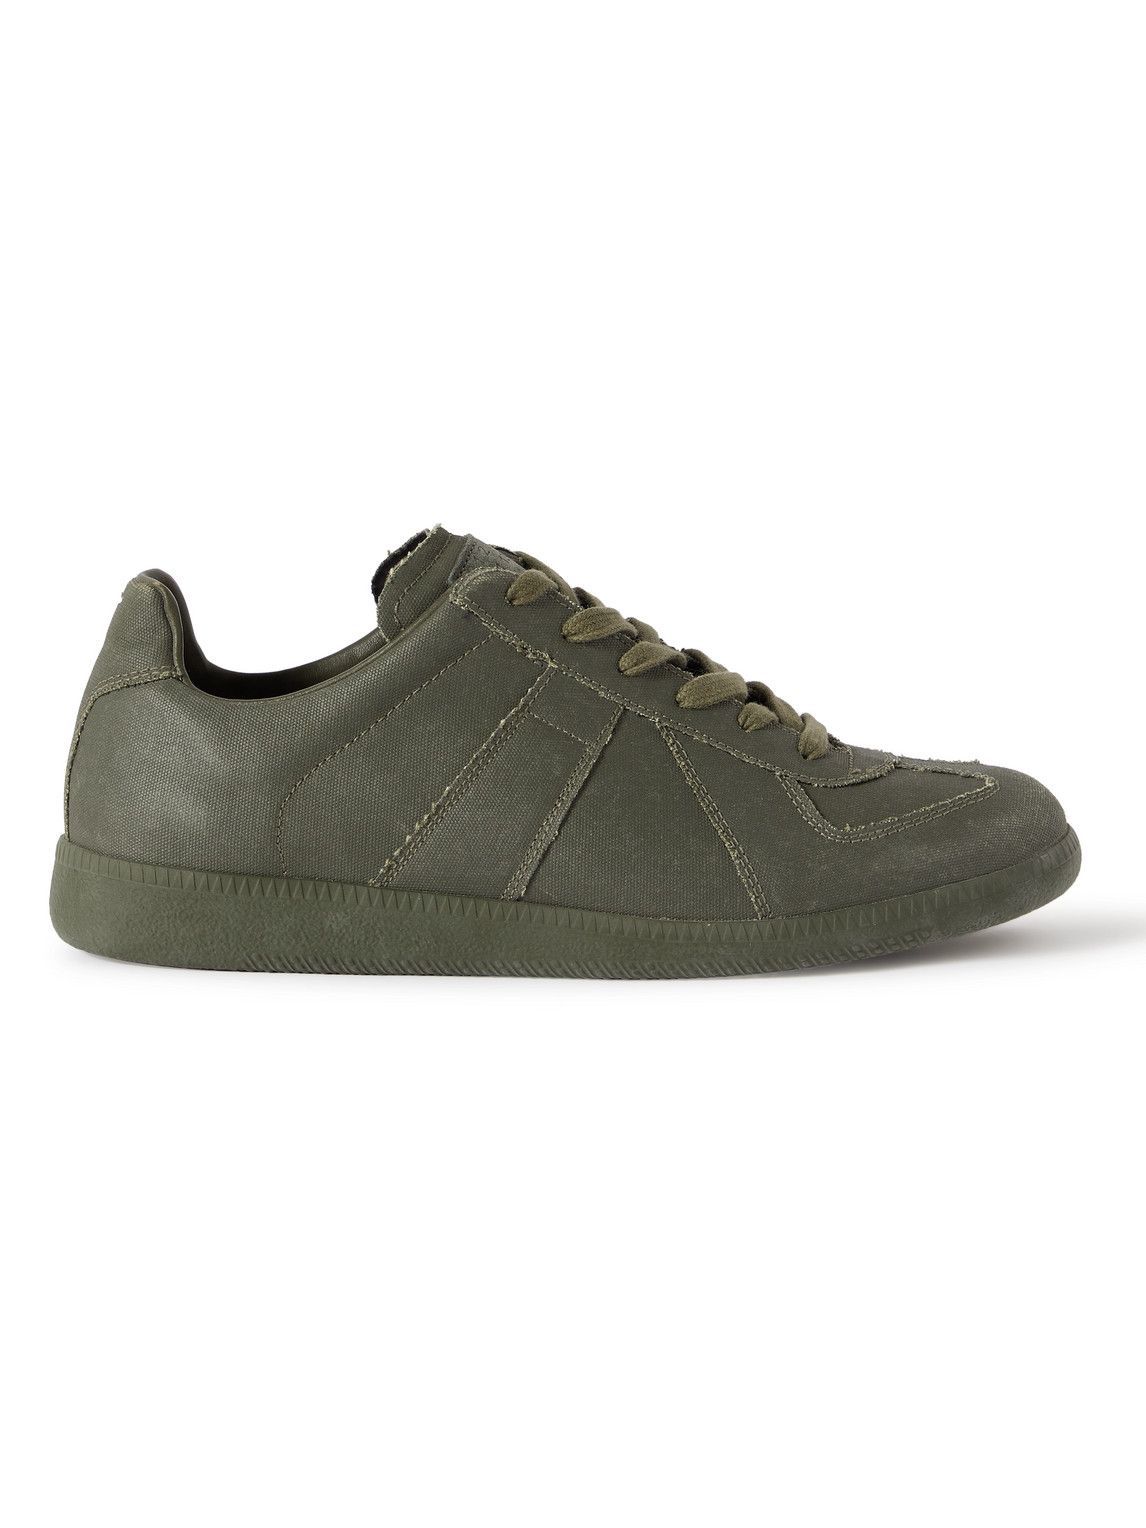 Maison Margiela - Replica Distressed Coated-Canvas Sneakers - Green ...